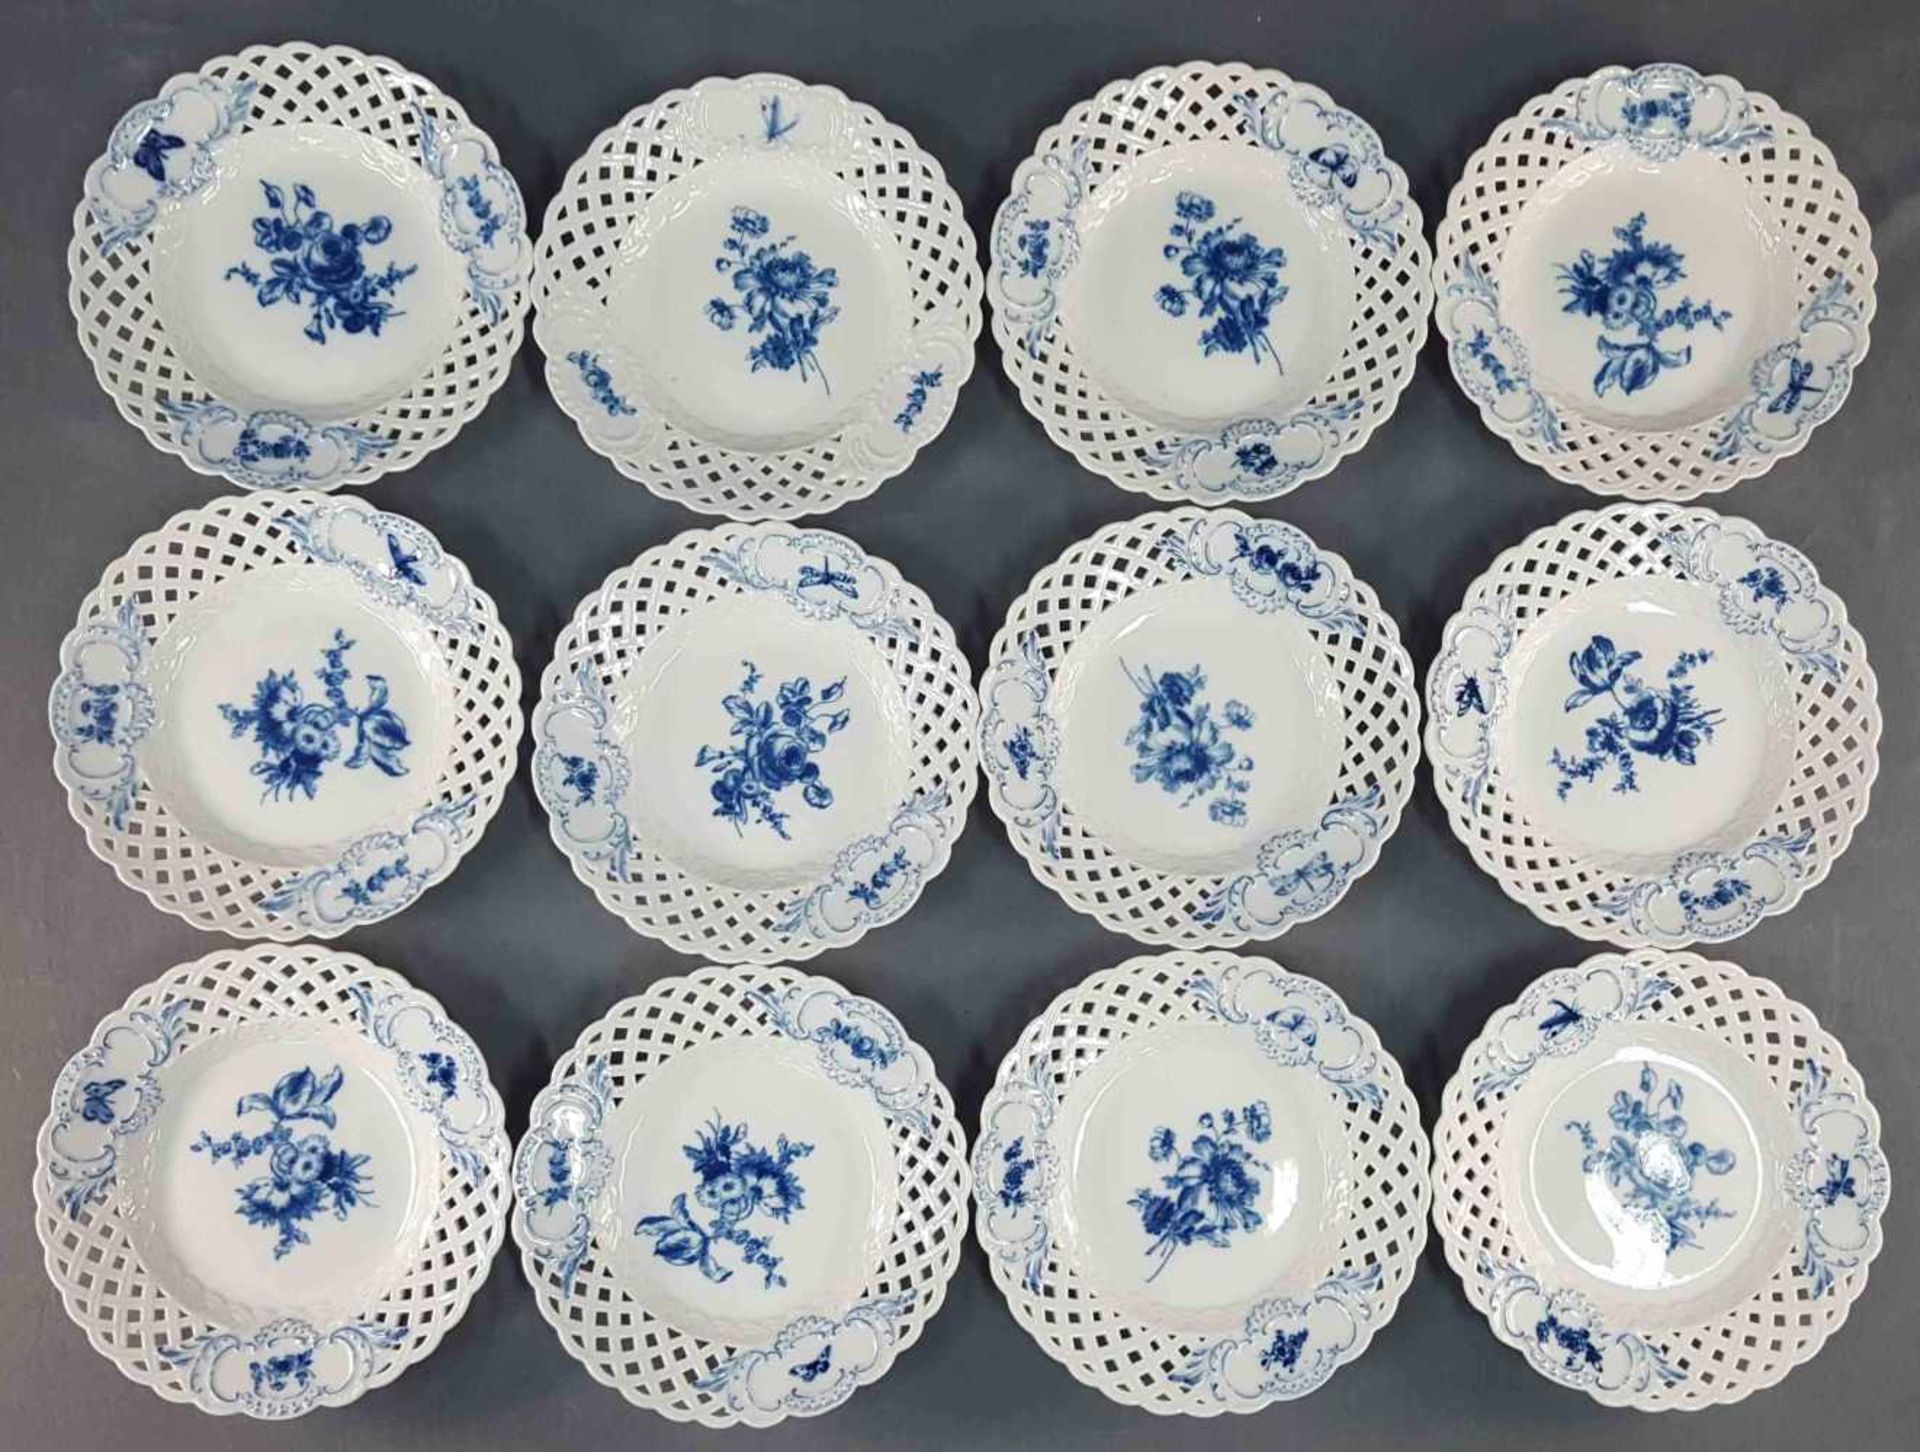 14 plates Meissen. '' Blue flowers with insects '' - Image 4 of 7